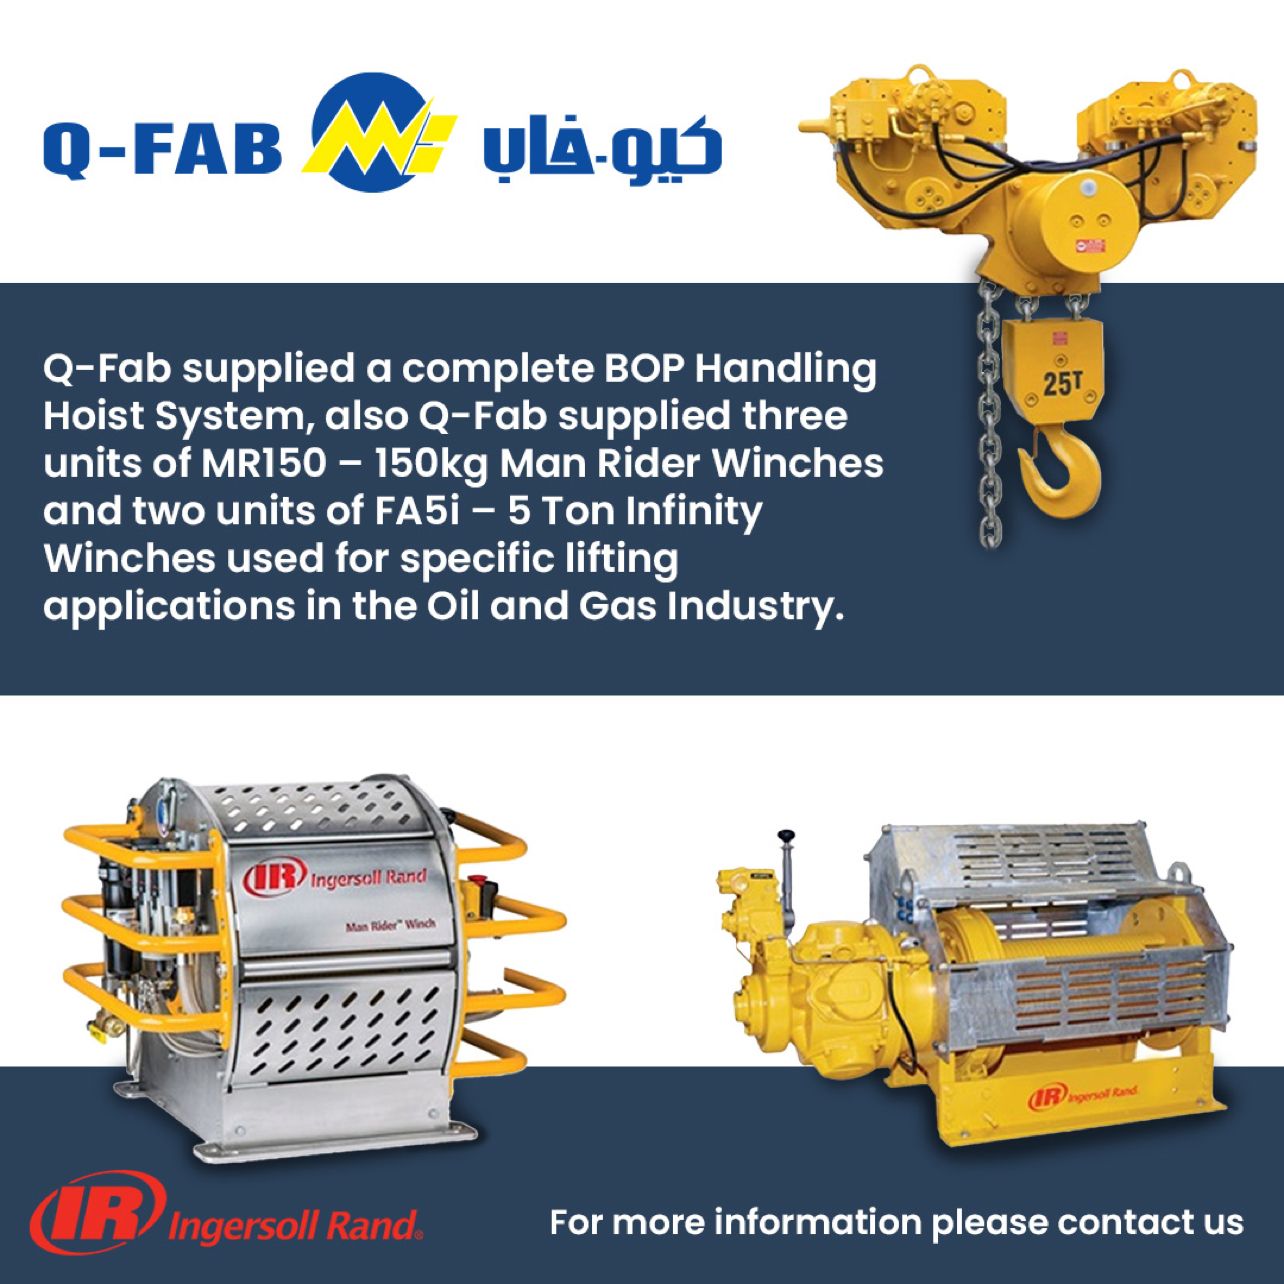 Q-Fab is authorized distributor for Ingersoll Rand “Lifting & Material Handling” Cover